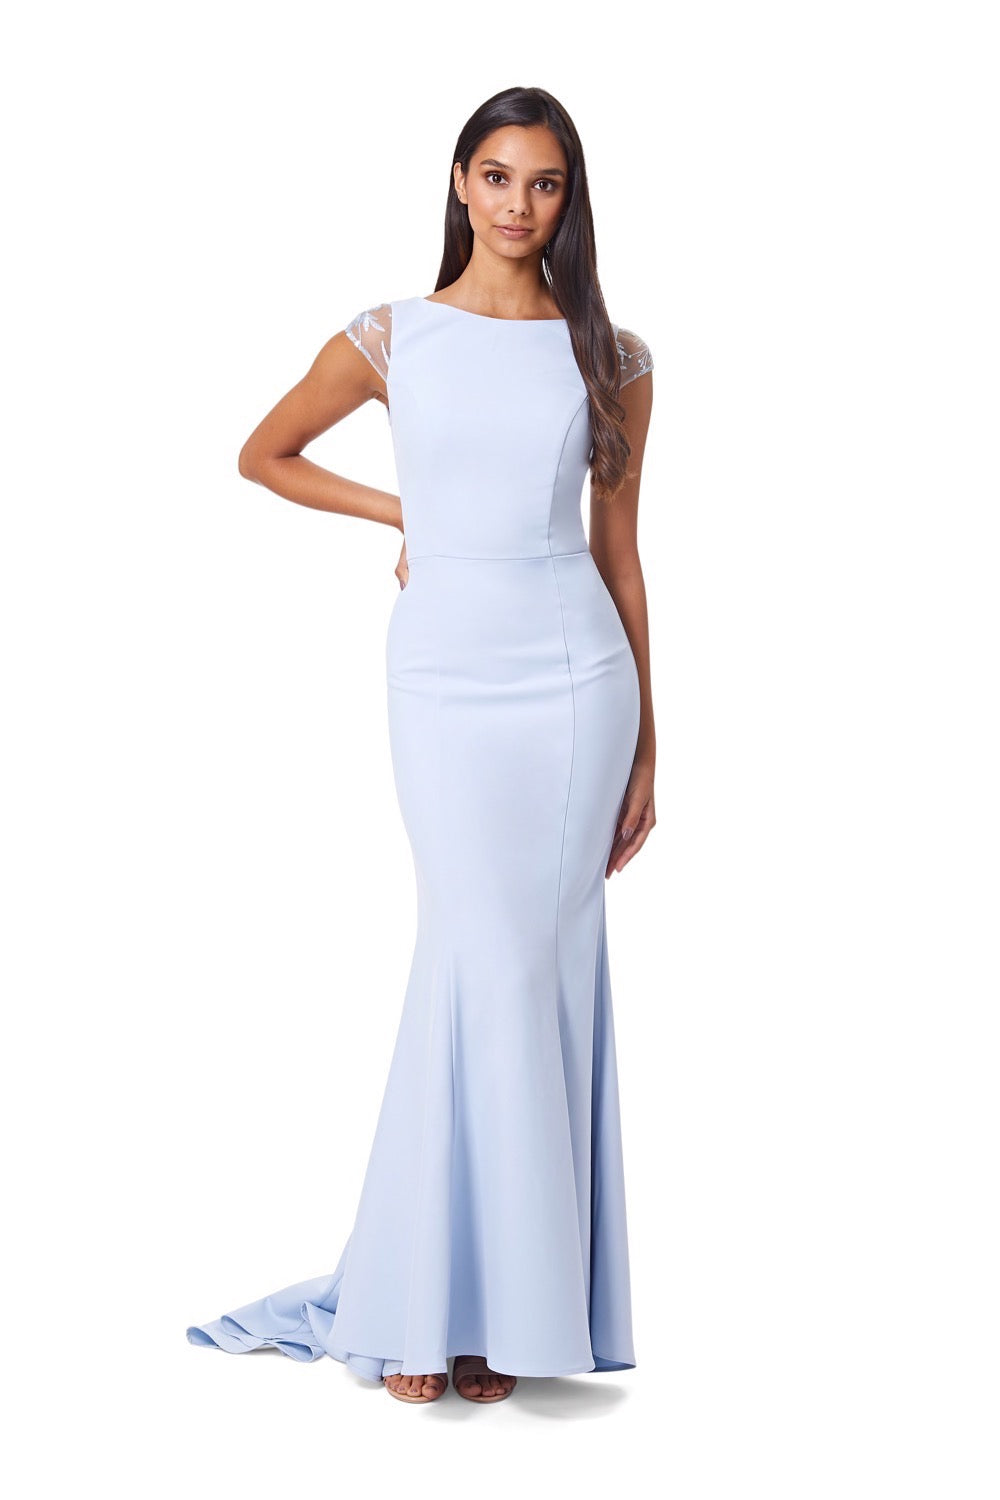 Masa Fishtail Maxi Dress with Lace Cap Sleeves and Embroidered Button Back, UK 12 / US 8 / EU 40 / Powder Blue